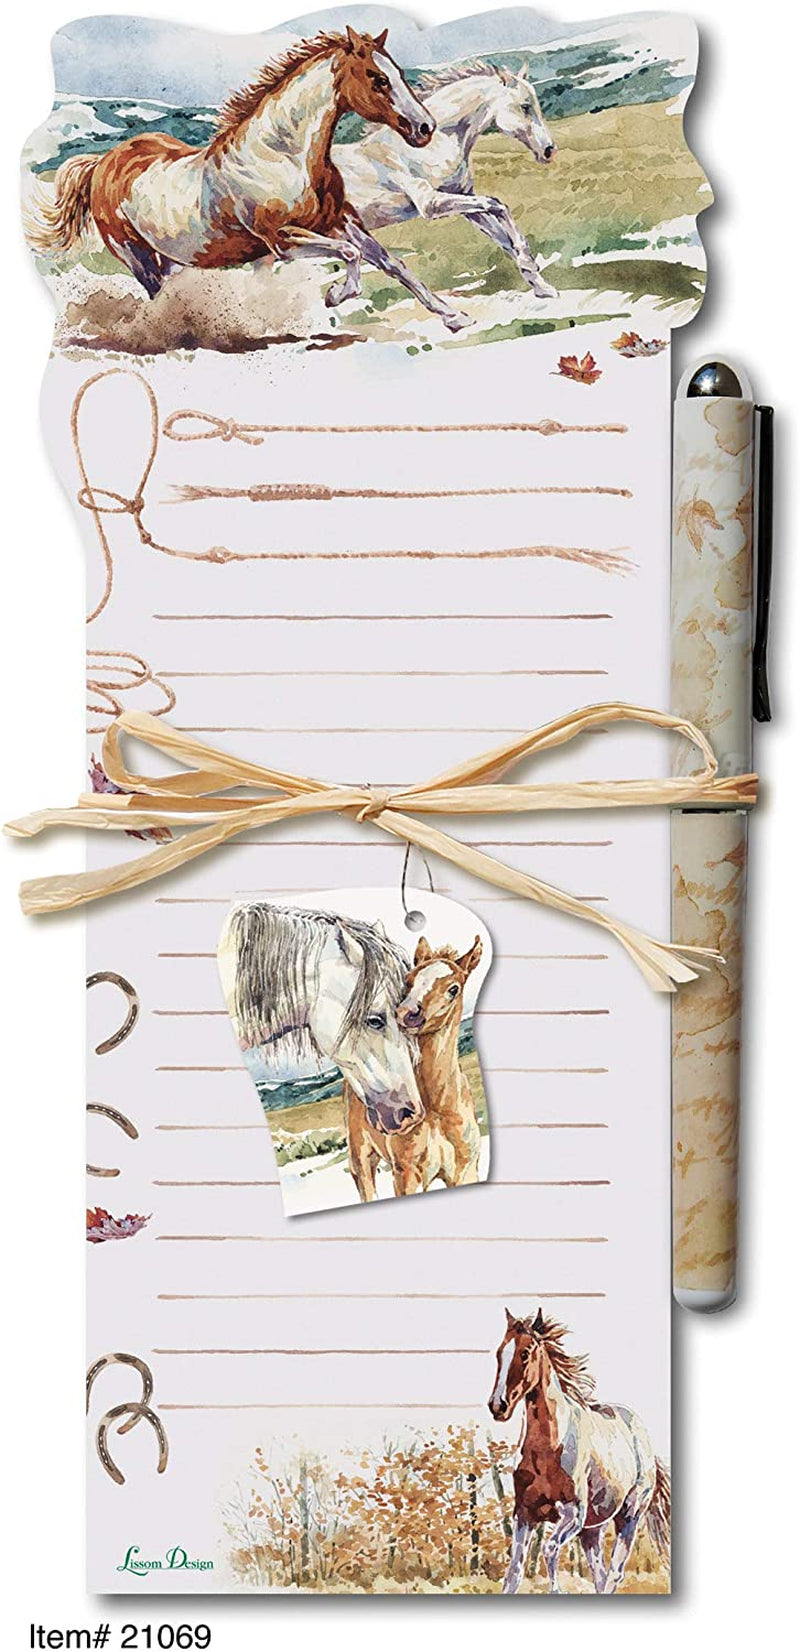 Lissom Design, Lissom Design Die-Cut Magnetic List Pad, 8.75 X 3.75-Inches, Wild Mustang